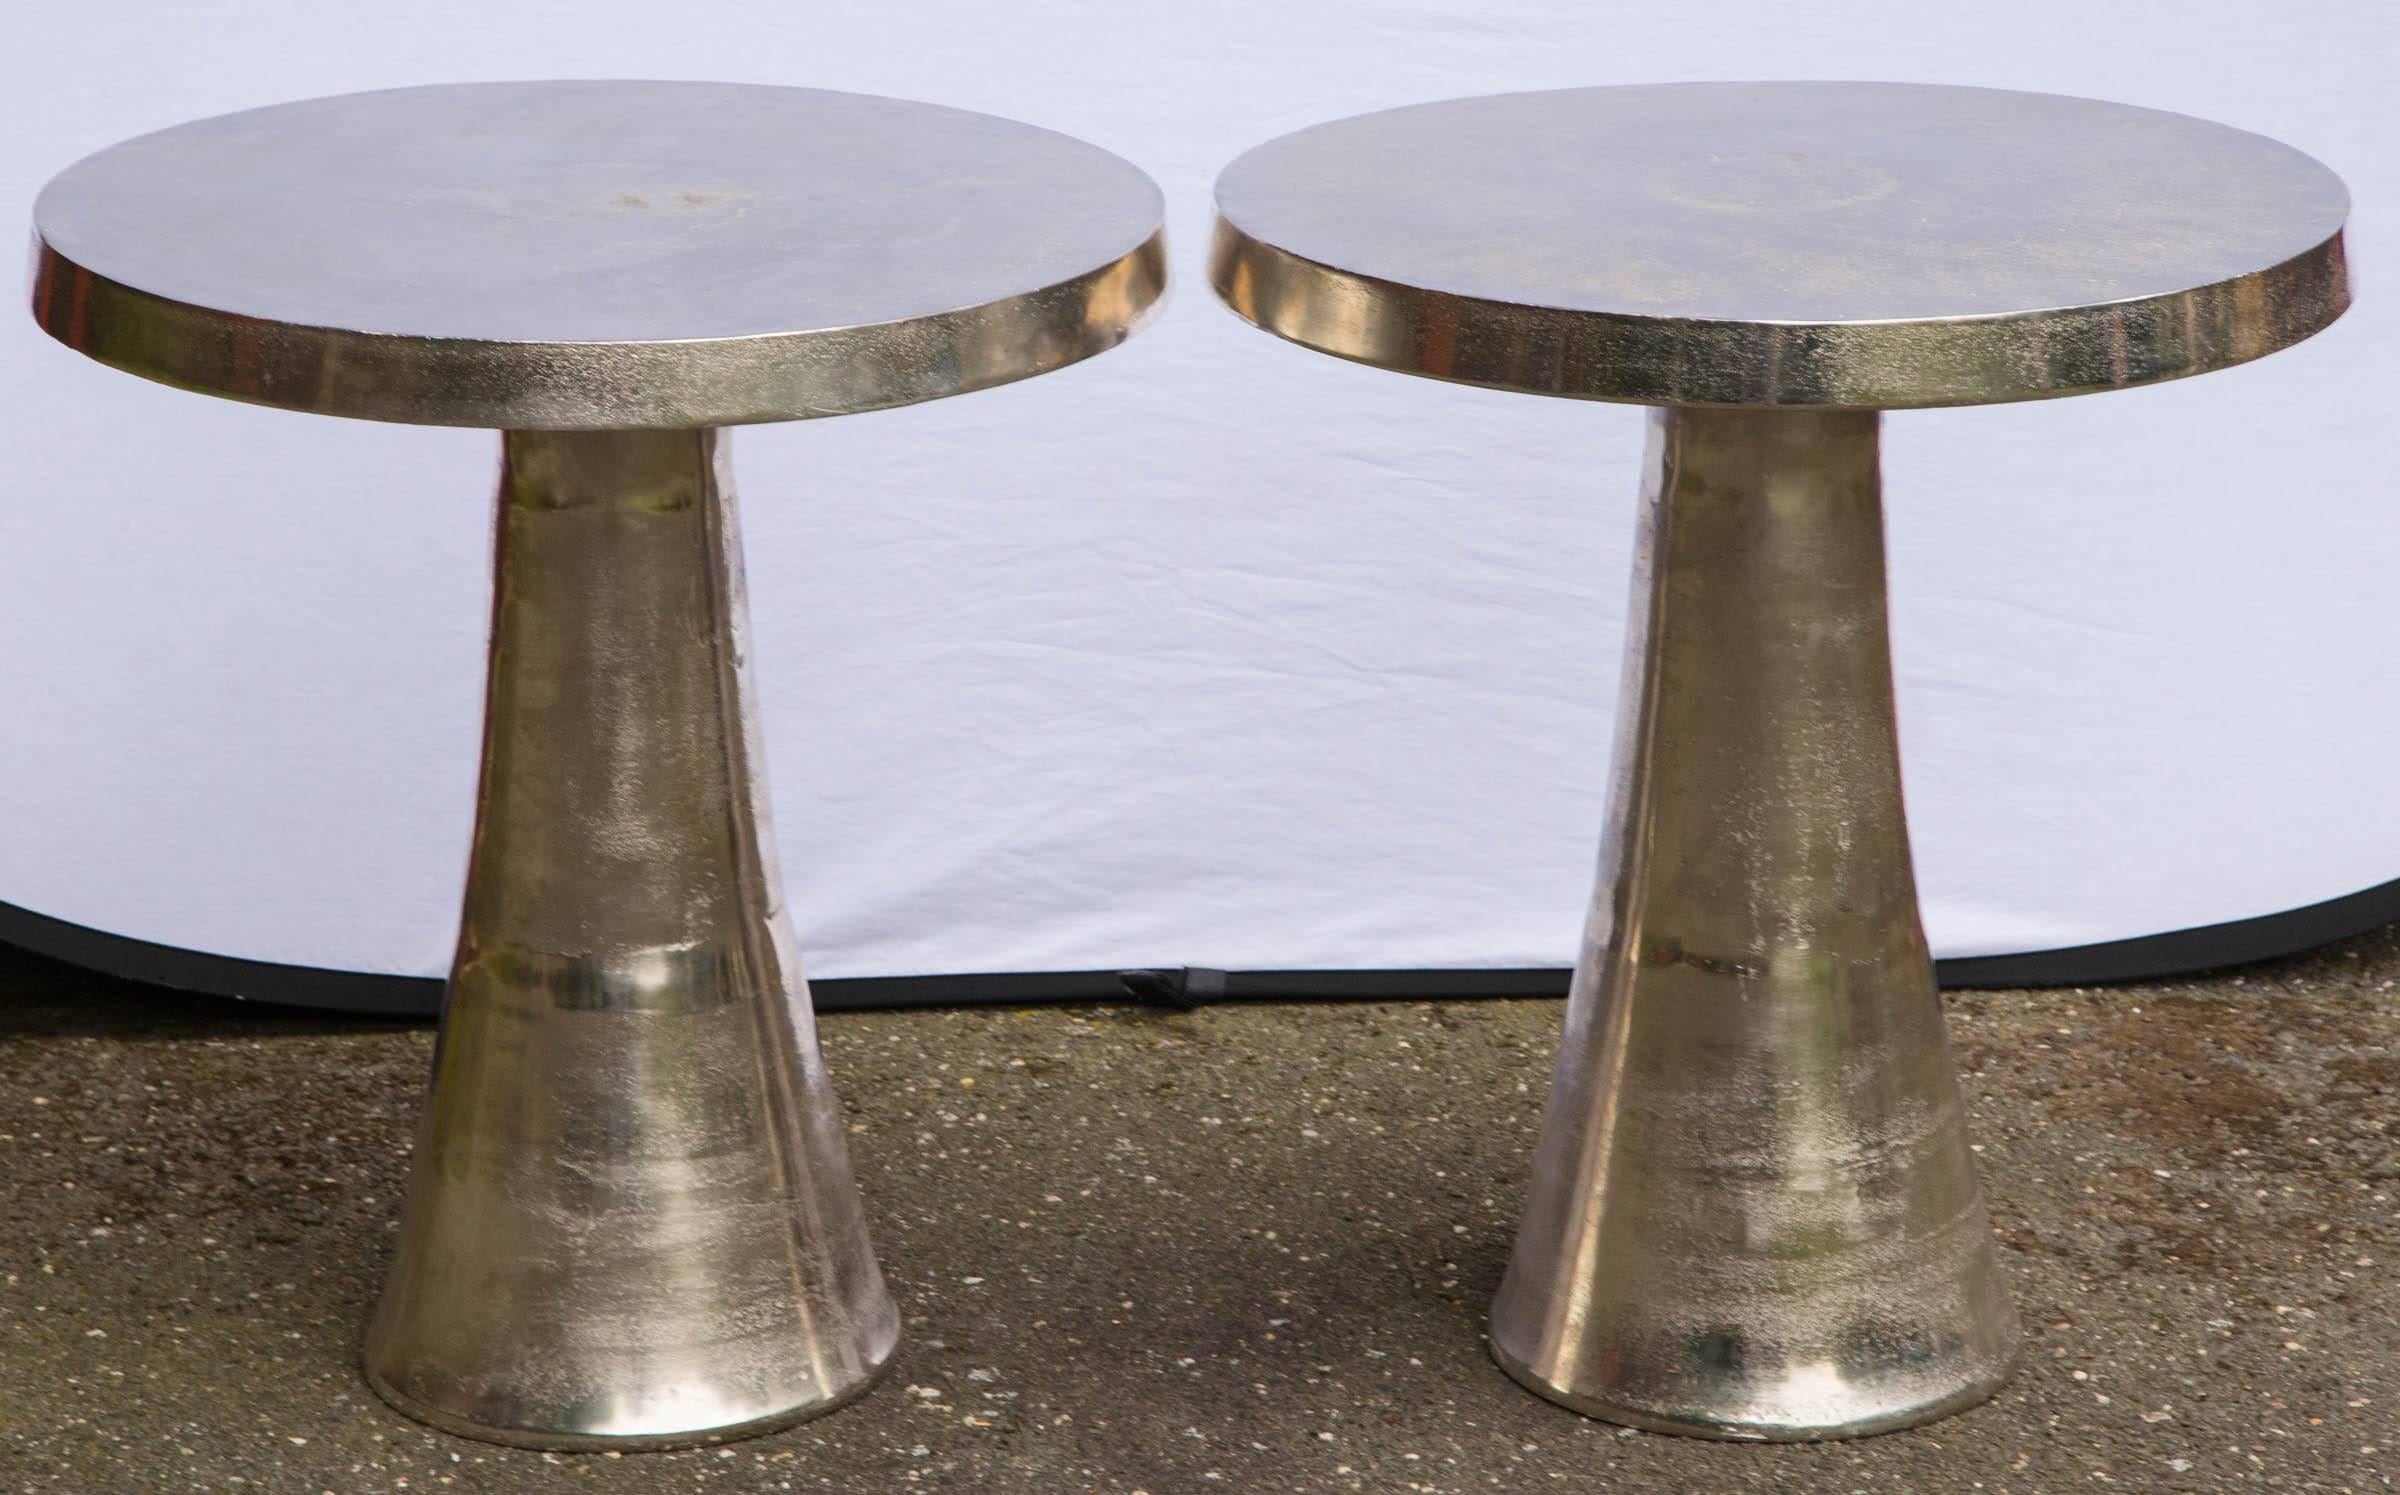 French Unique Pair of Round Polished Stainless Steel Tables